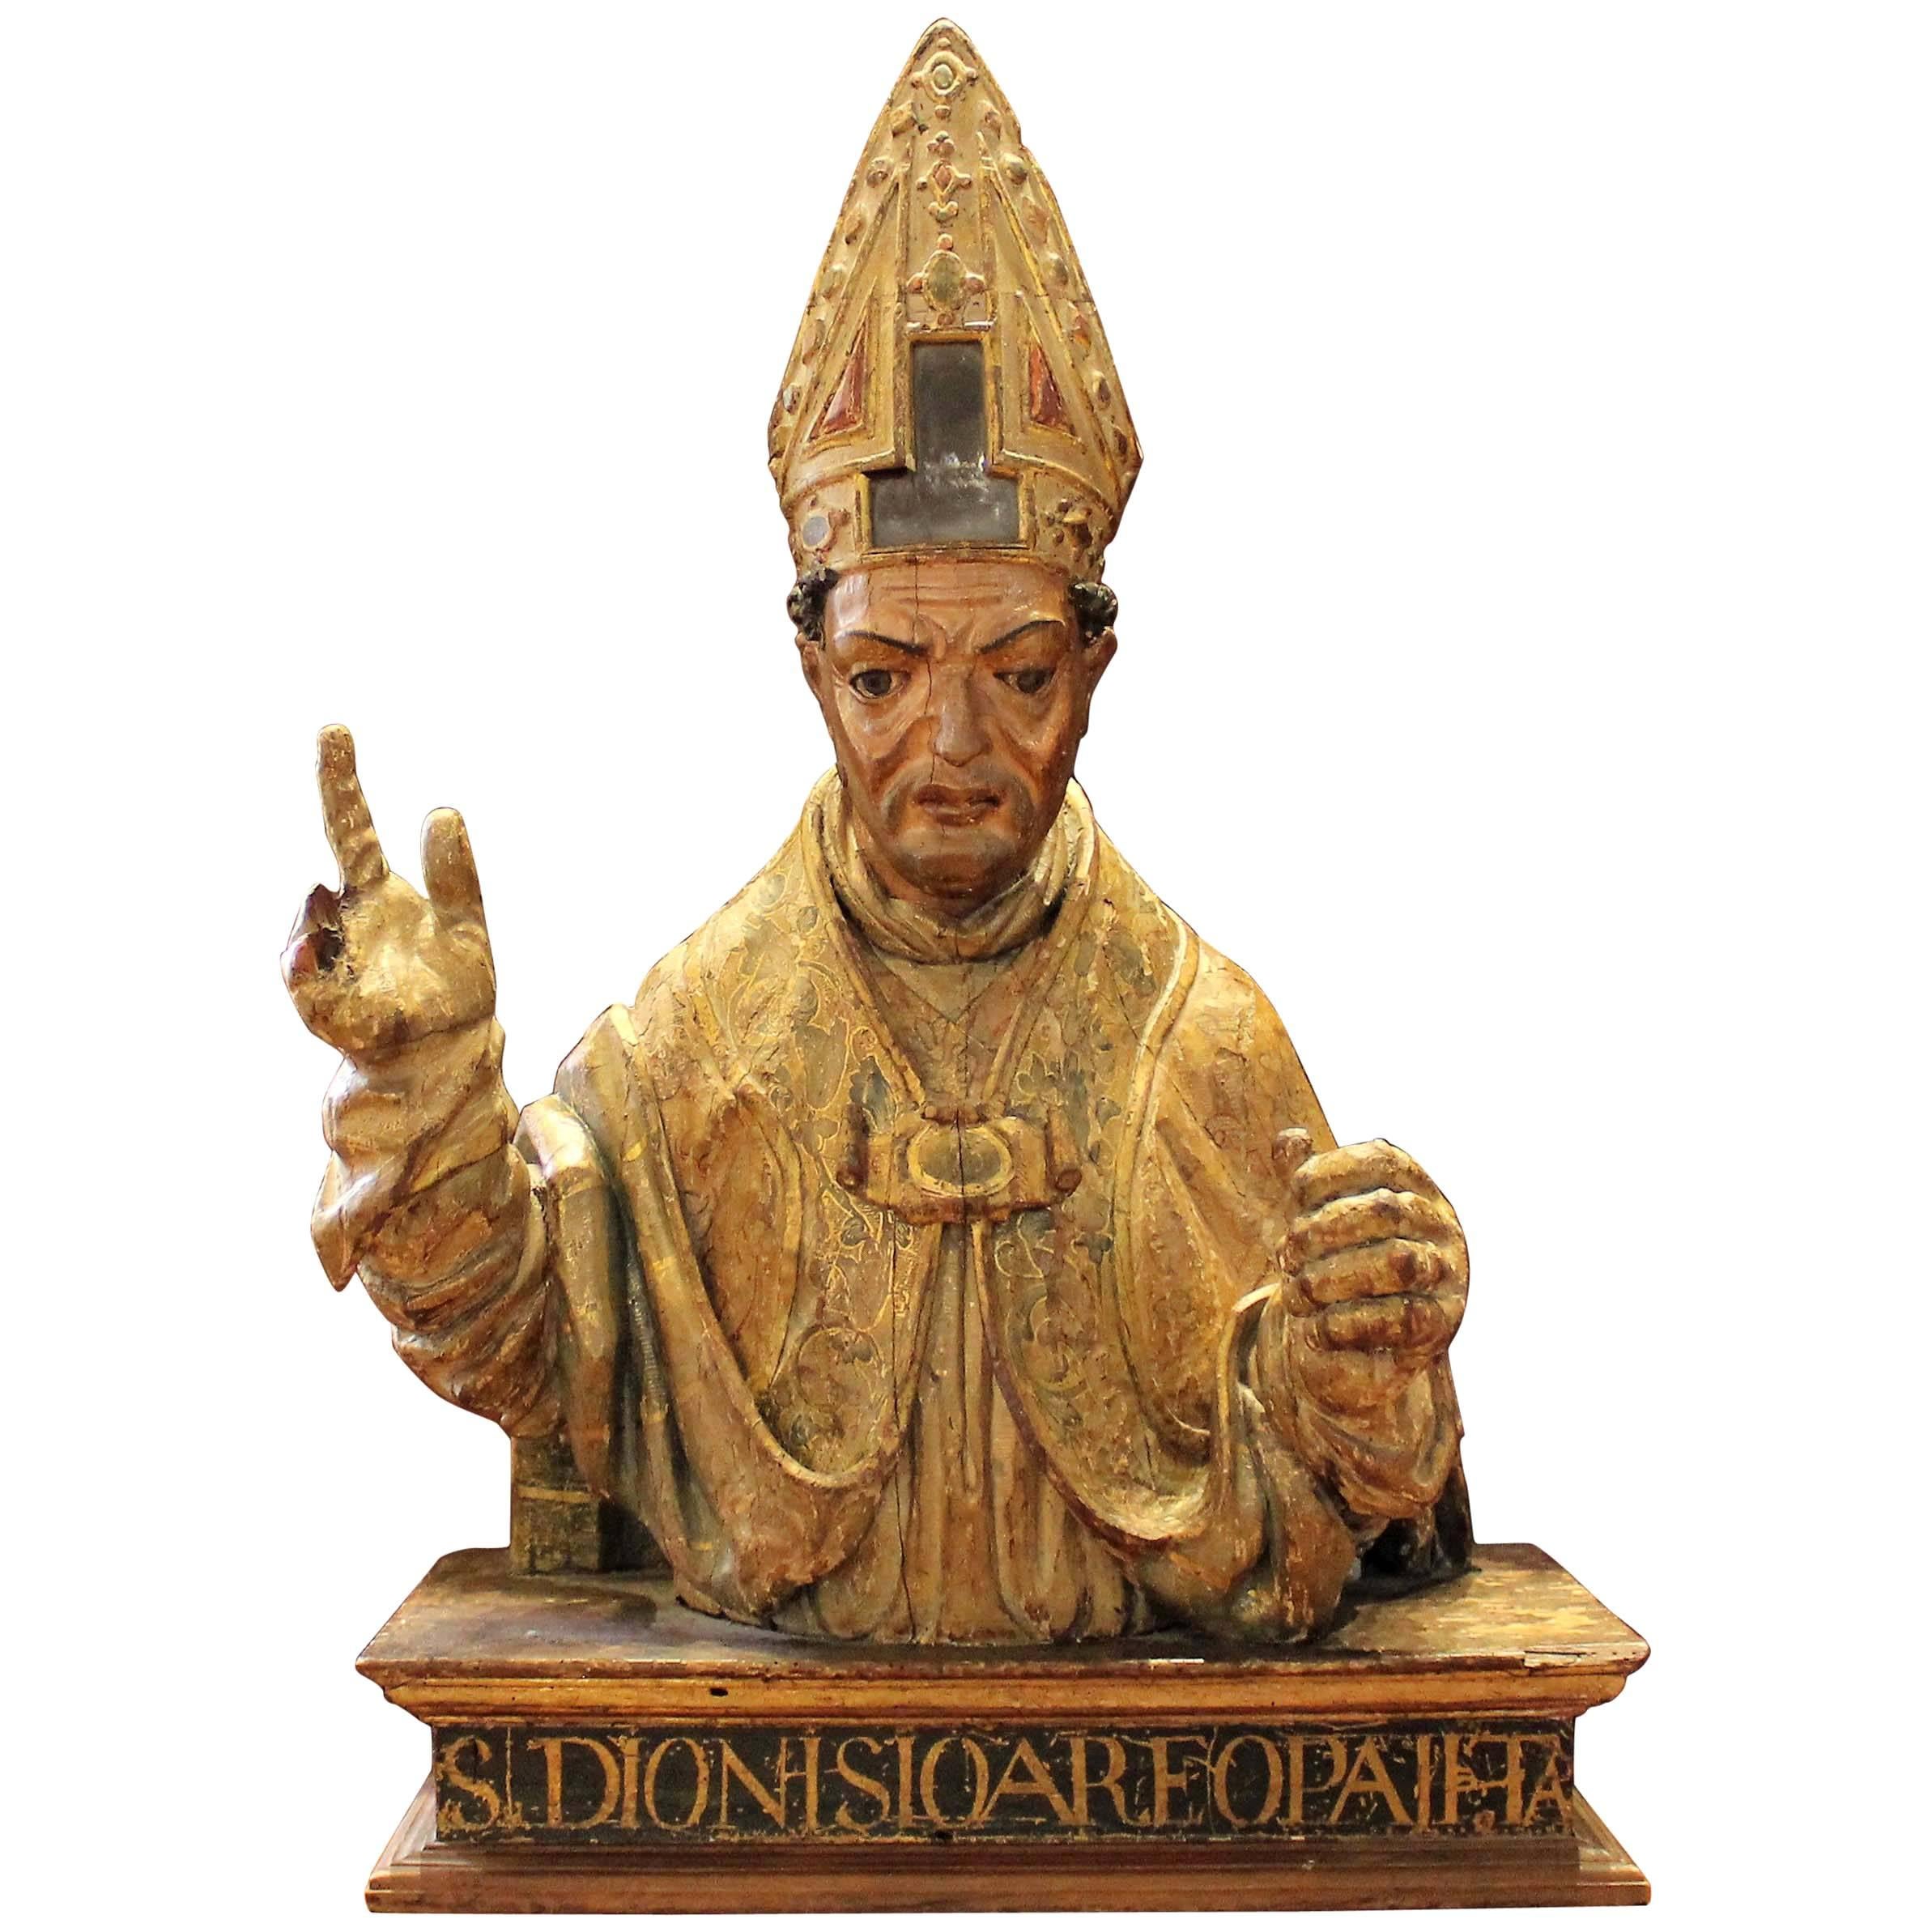 16th Century Polychrome Reliquary Bust of St. Dionysius the Areopagite